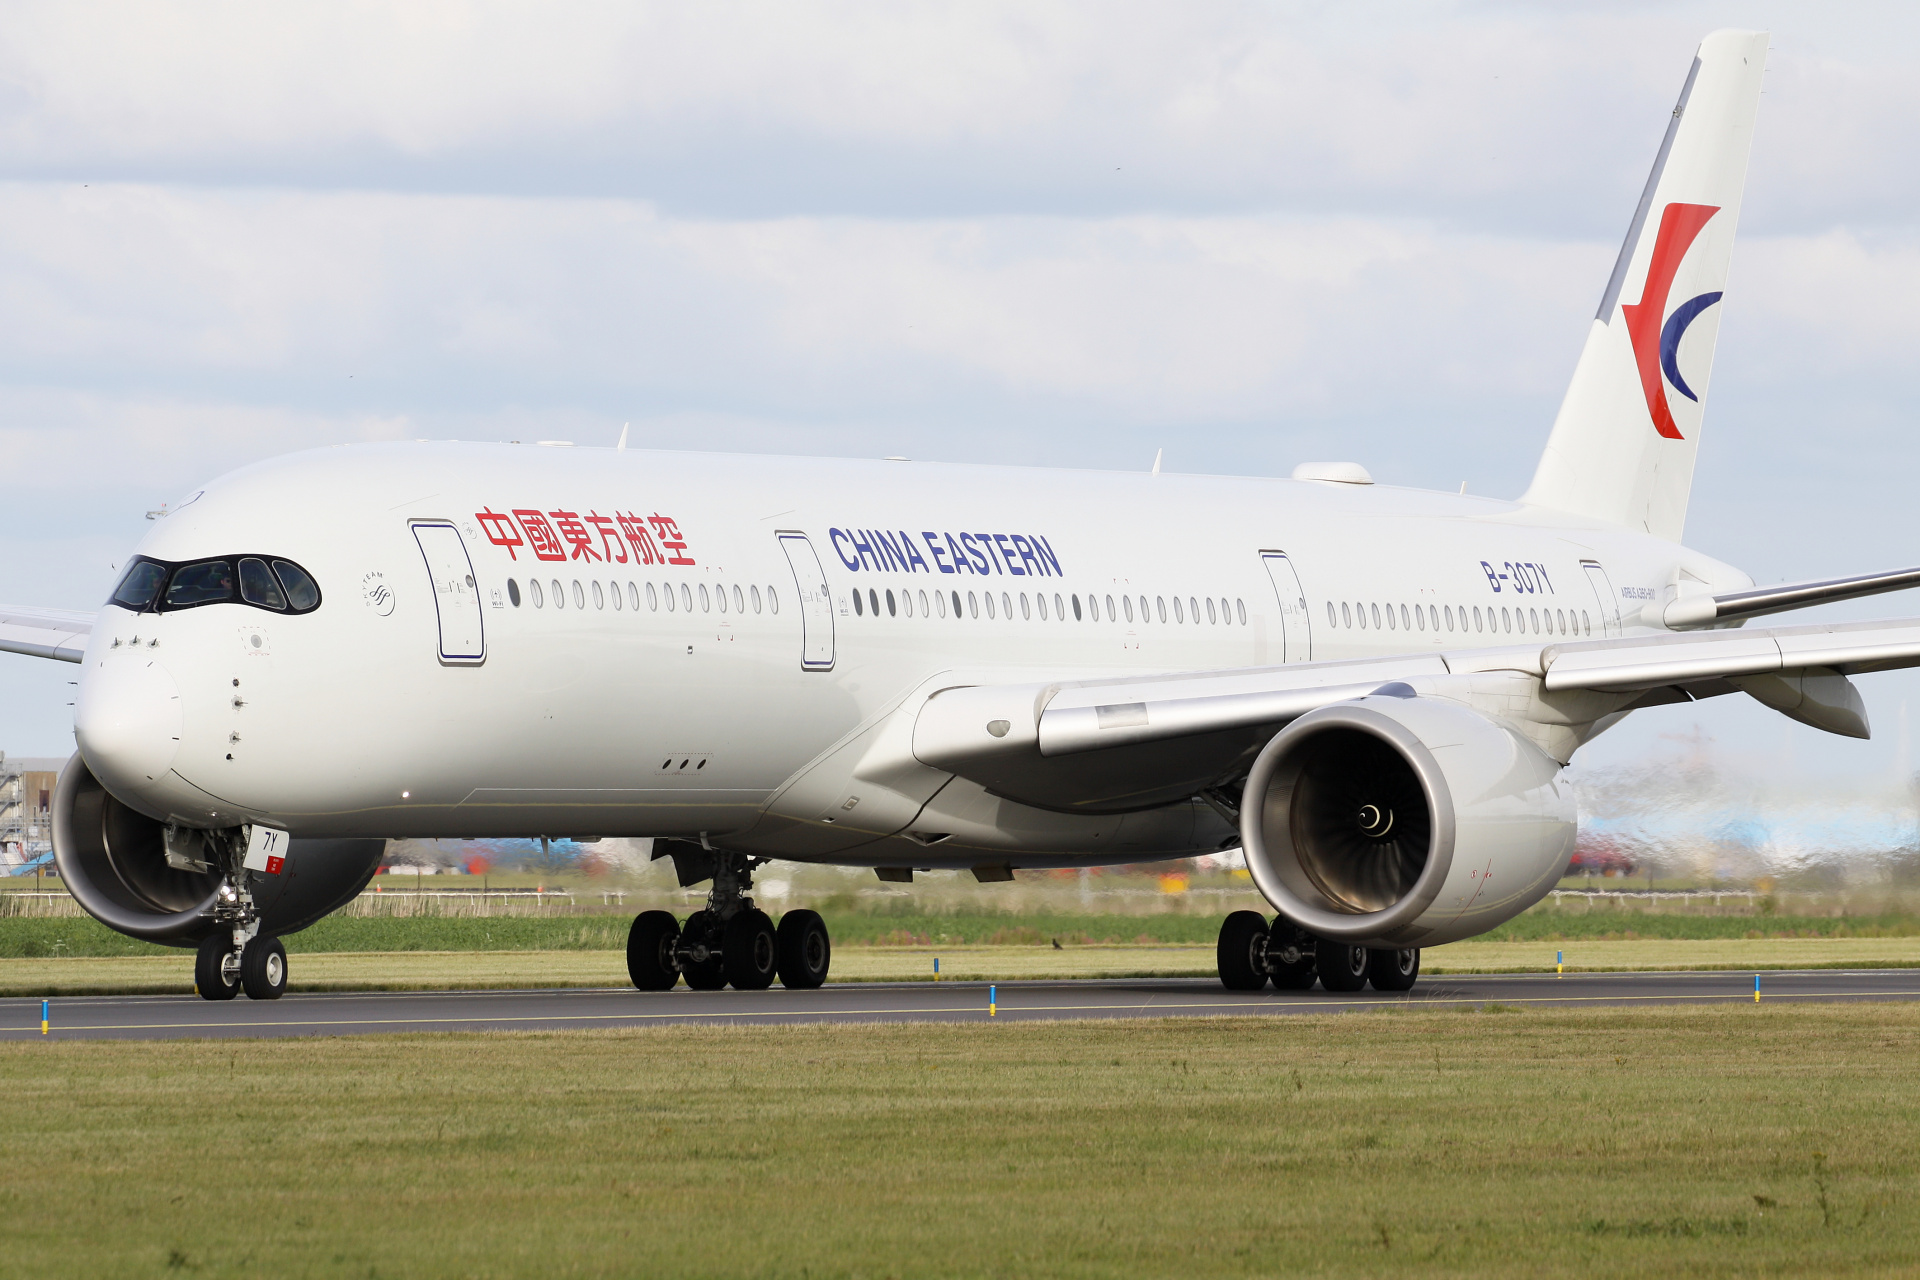 B-307Y, China Eastern Airlines (Aircraft » Schiphol Spotting » Airbus A350-900)